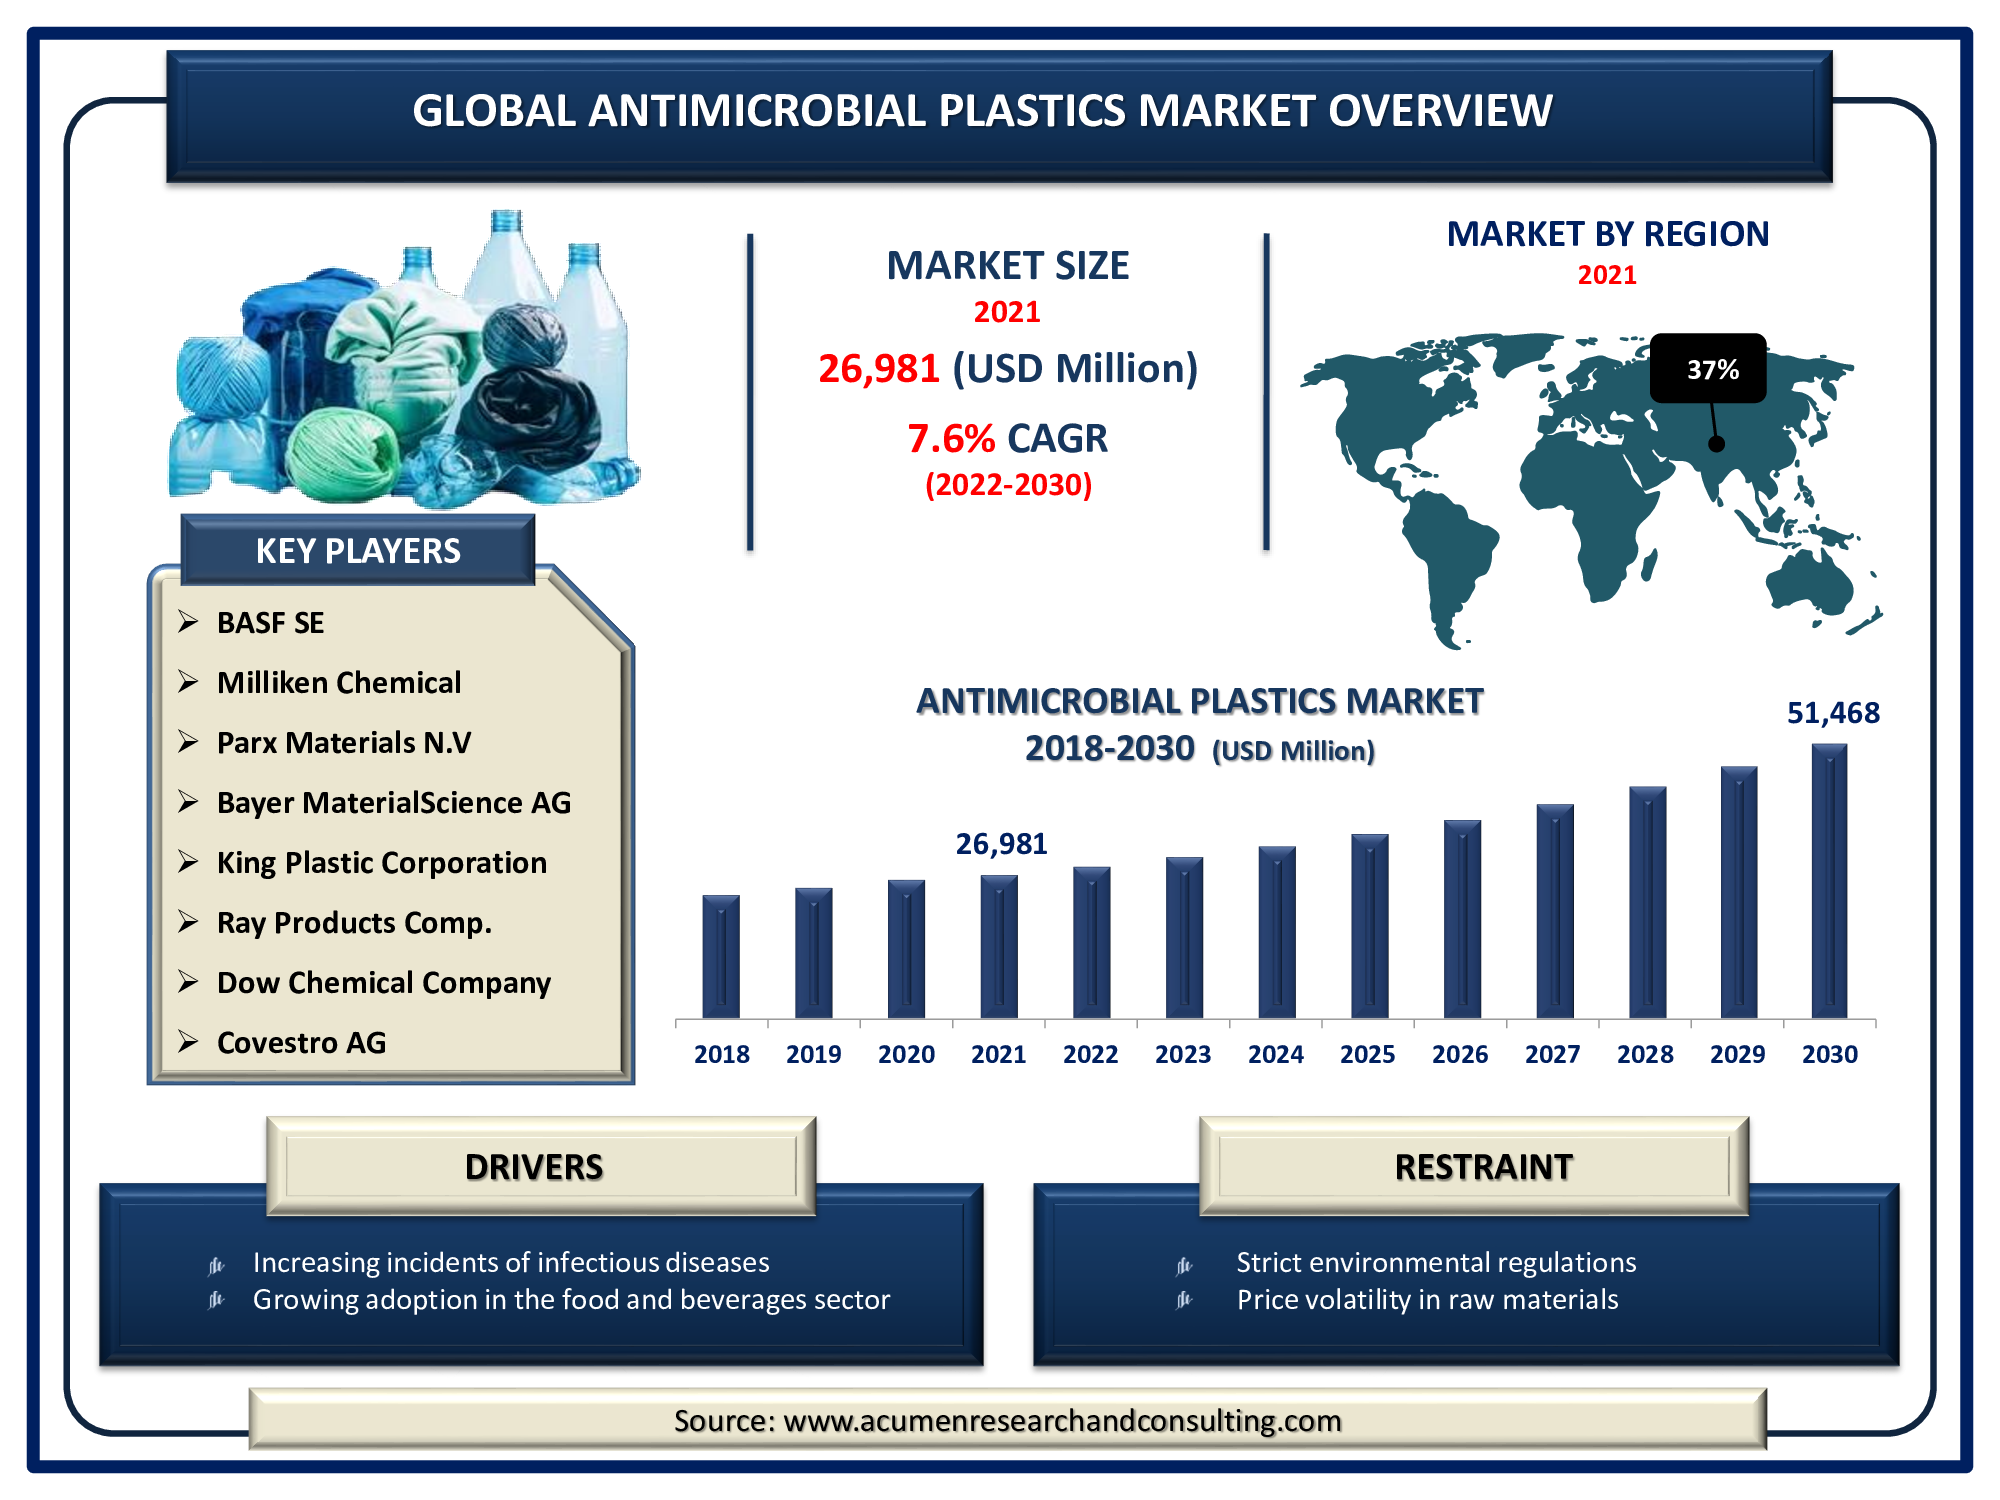 Antimicrobial Plastics Market is expected to reach USD 51,468 Million by 2030 with a considerable CAGR of 7.6%